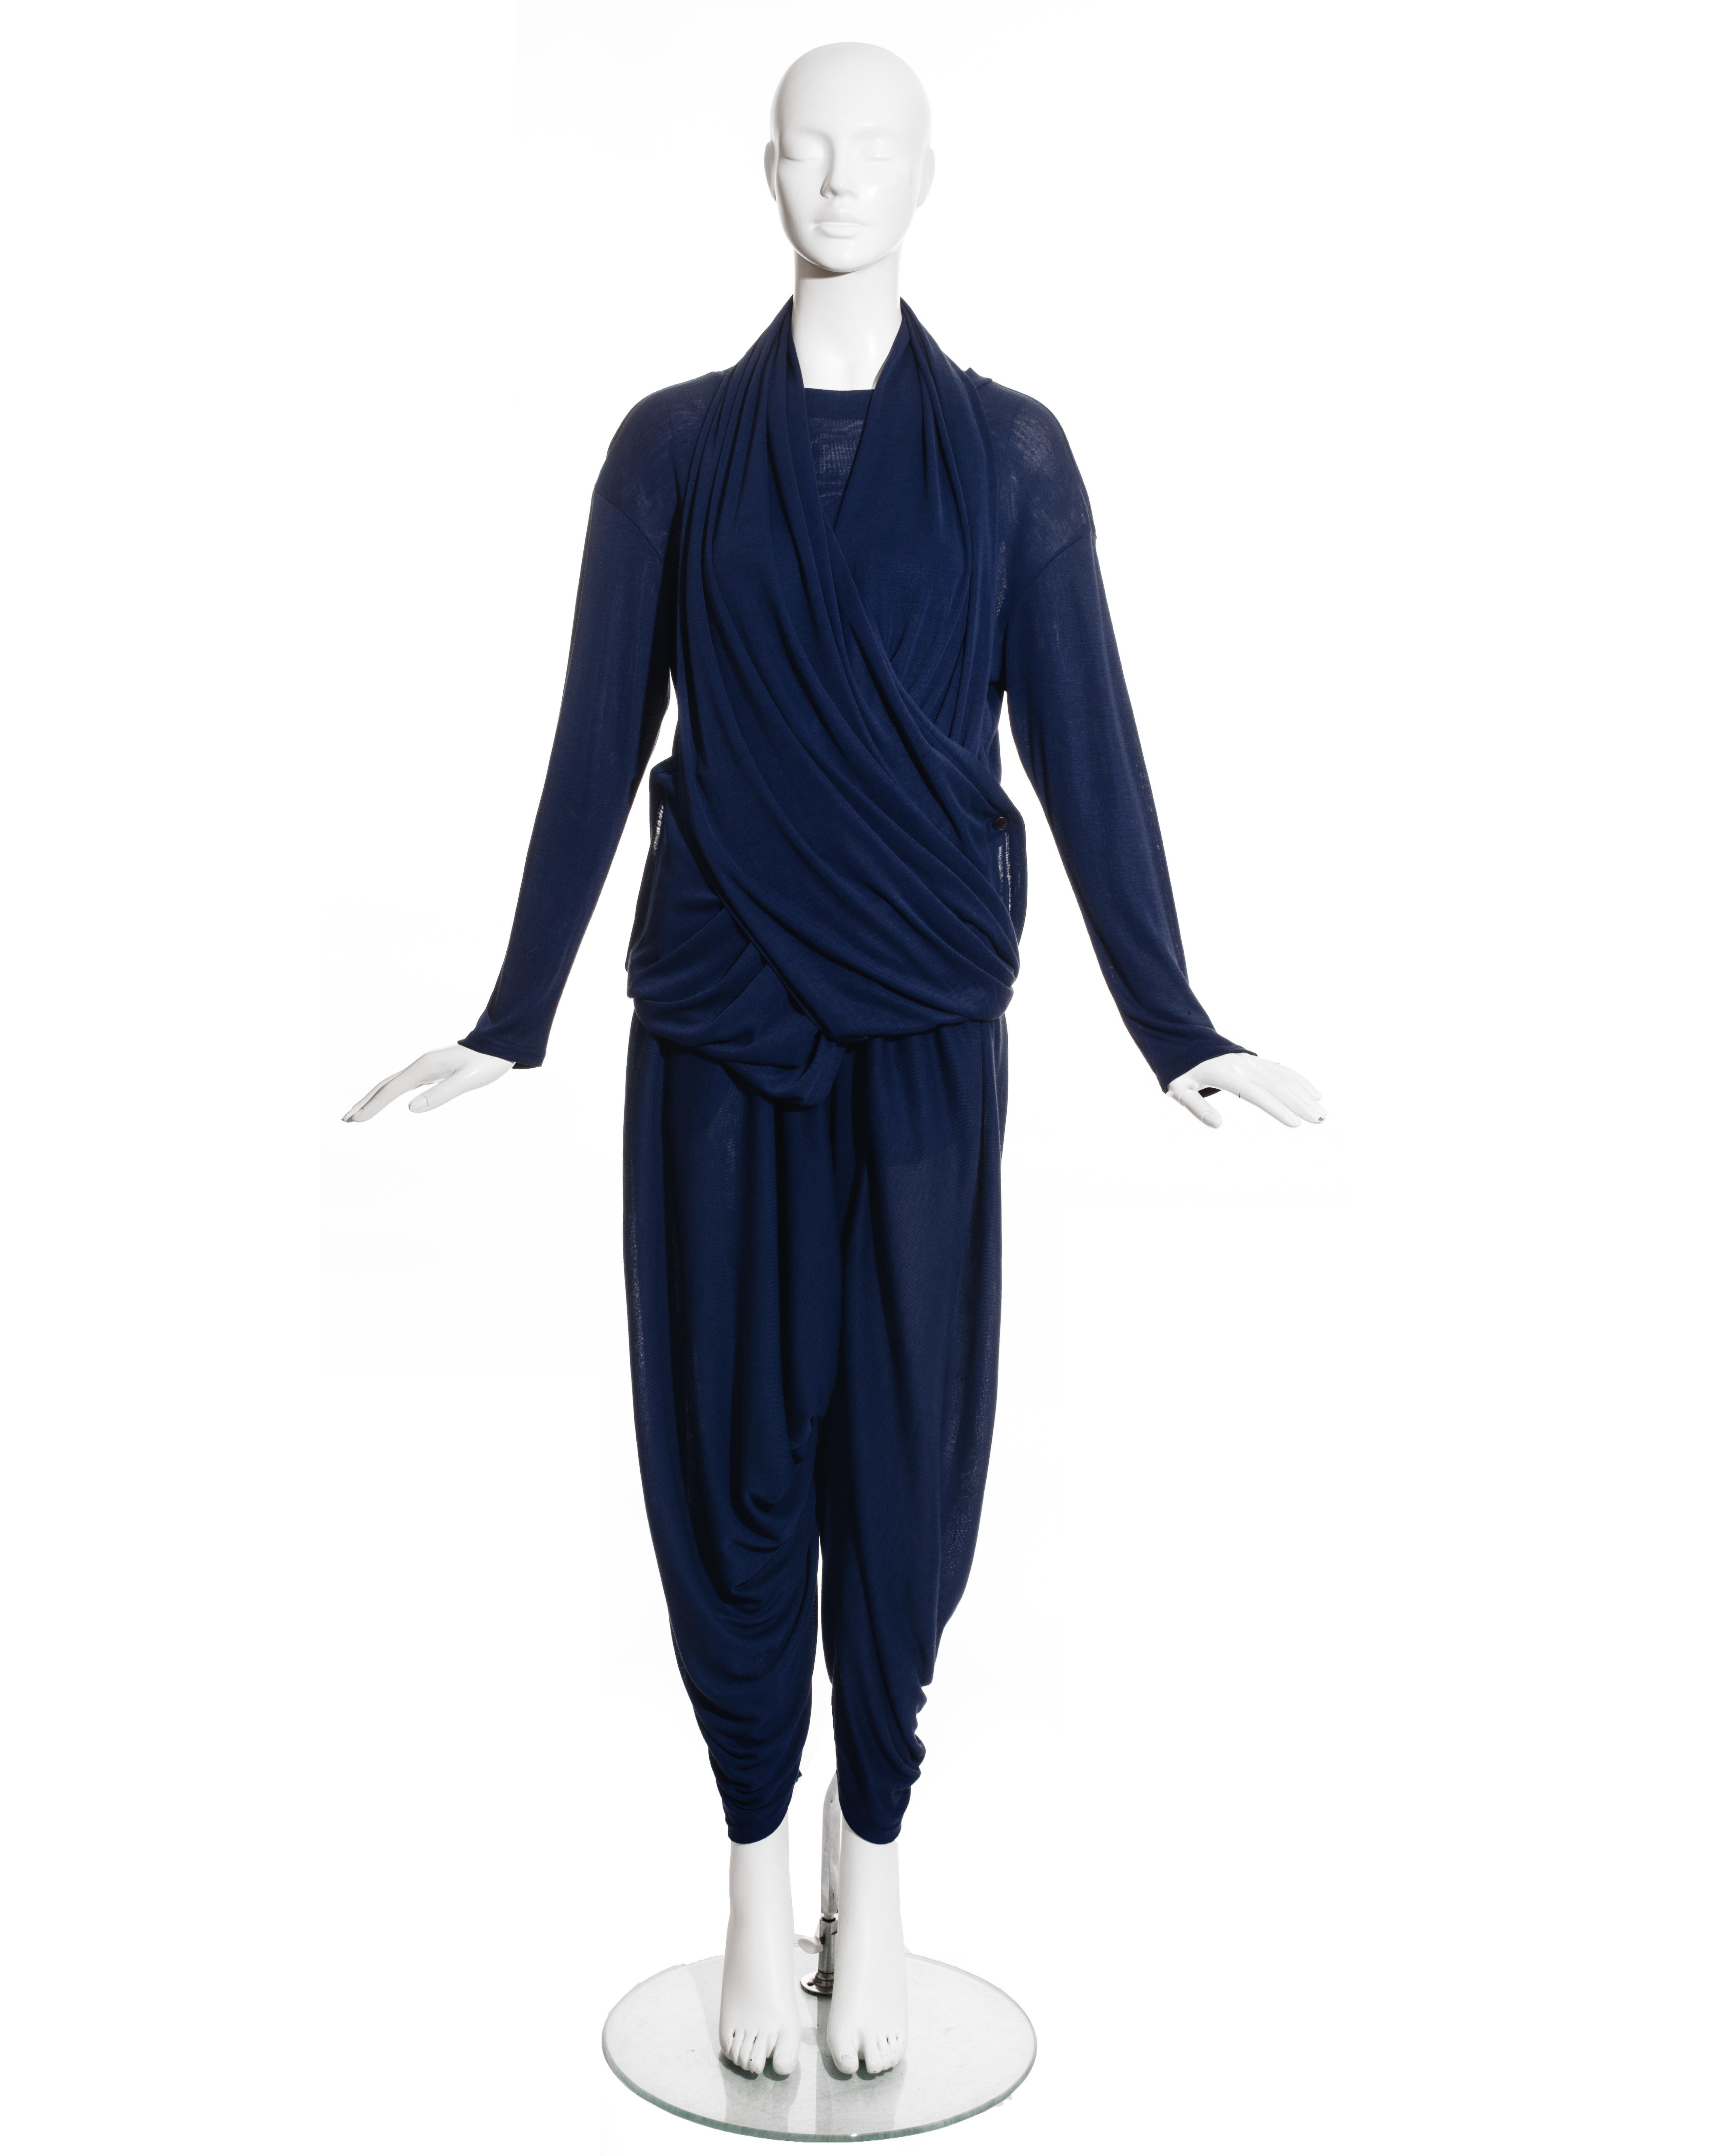 Issey Miyake Permanente, blue rayon knitted pant suit comprising: sweater with two long panels which drape around the toros fastening with two buttons on the hips, harem style pants with elastic waistband.

Issey Miyake PERMANENTE was launched in